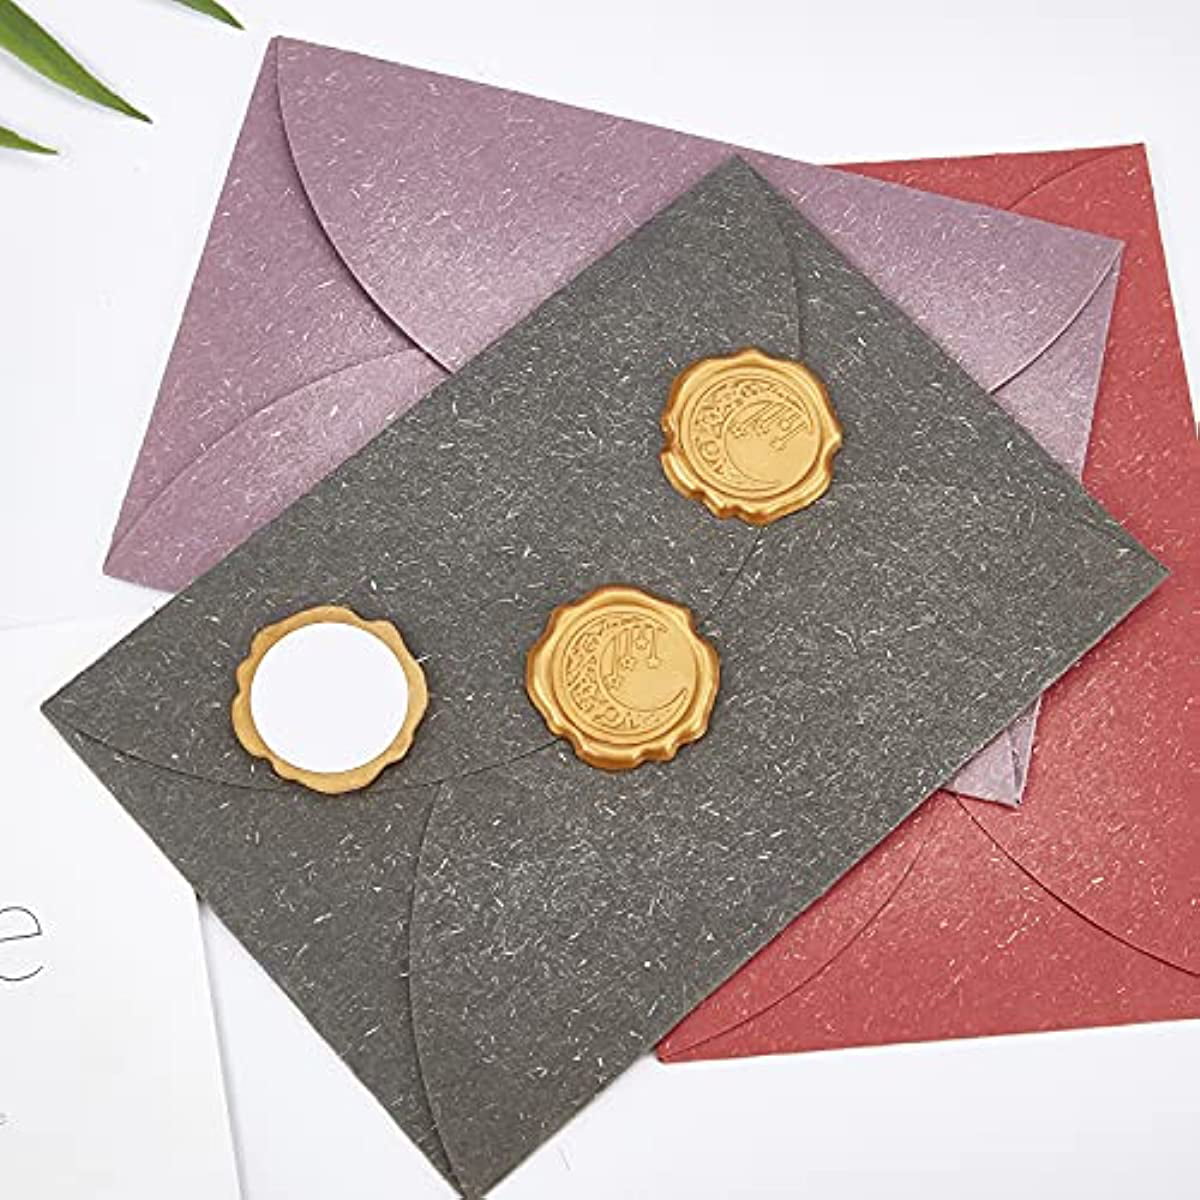  100Pcs Gold & White Wax Seal Stickers Handmade Envelope Seals  Self Adhesive Wax Stickers for Wedding Party Invitations, Envelope, Gift  Wrap, Christmas(Gold Rosemary Style, White Wax)